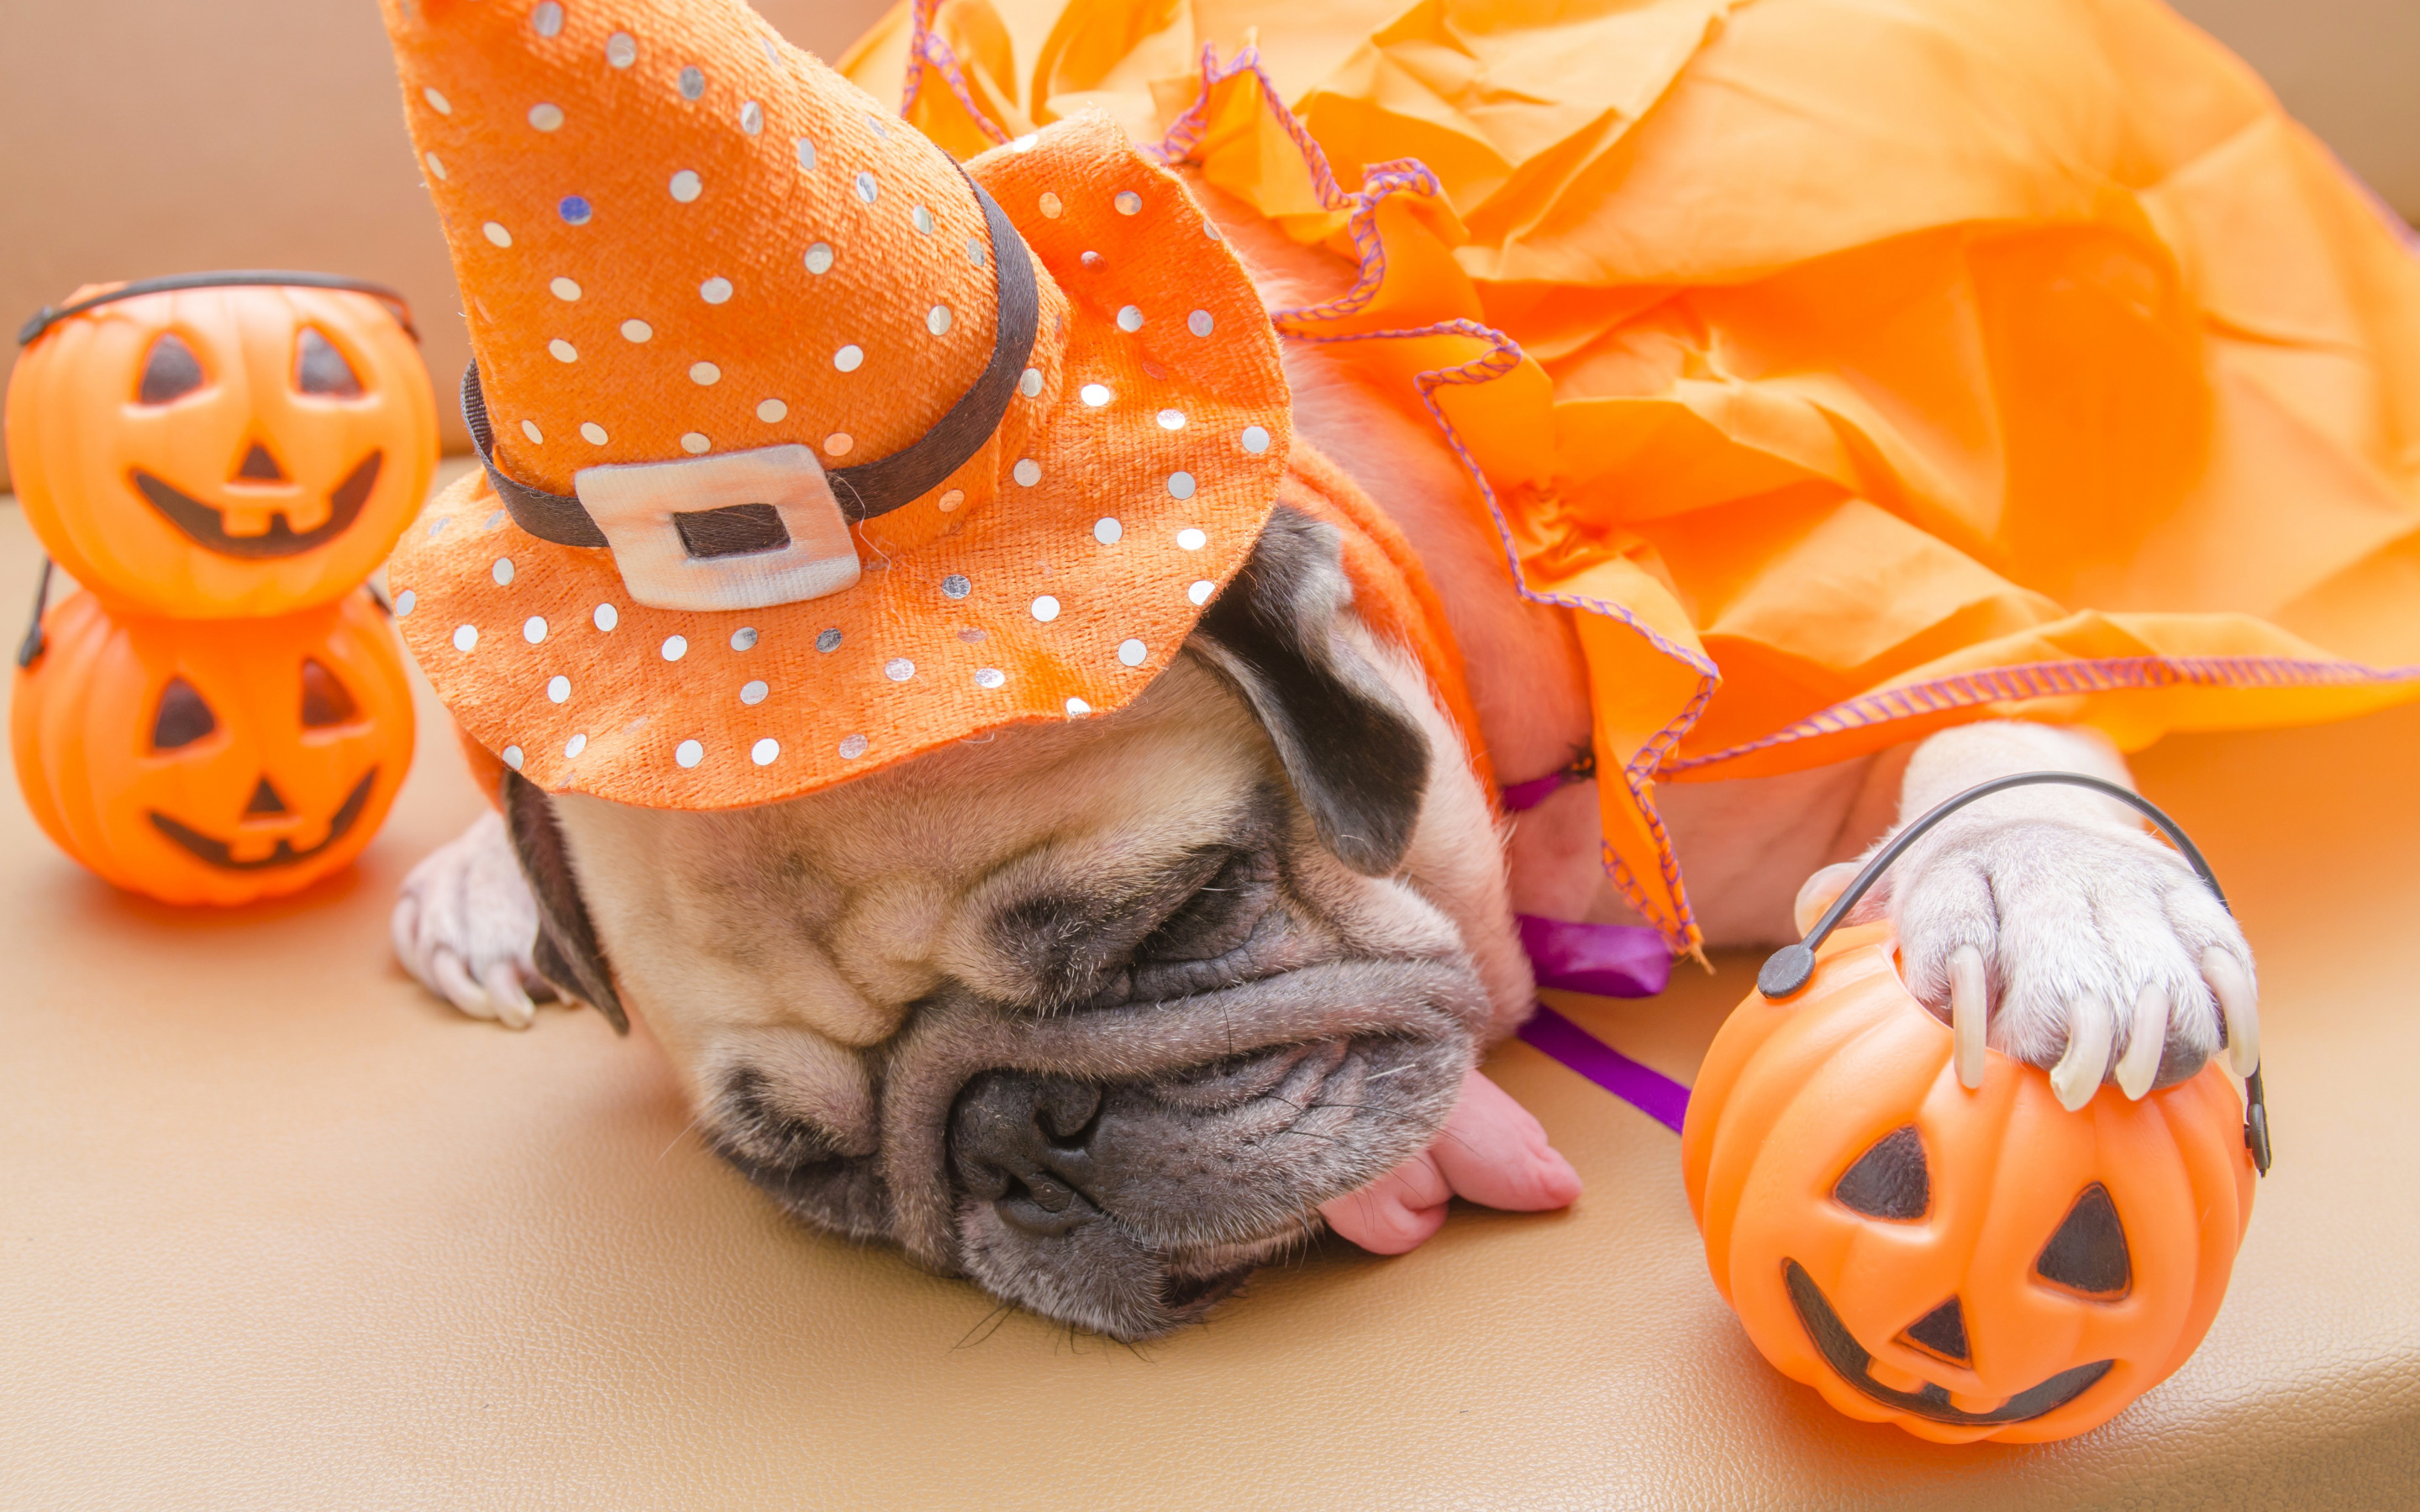 Download wallpaper Pug, Halloween, sleeping dog, tired puppy, cute animals, puppies, dogs, October pumpkins for desktop with resolution 2880x1800. High Quality HD picture wallpaper